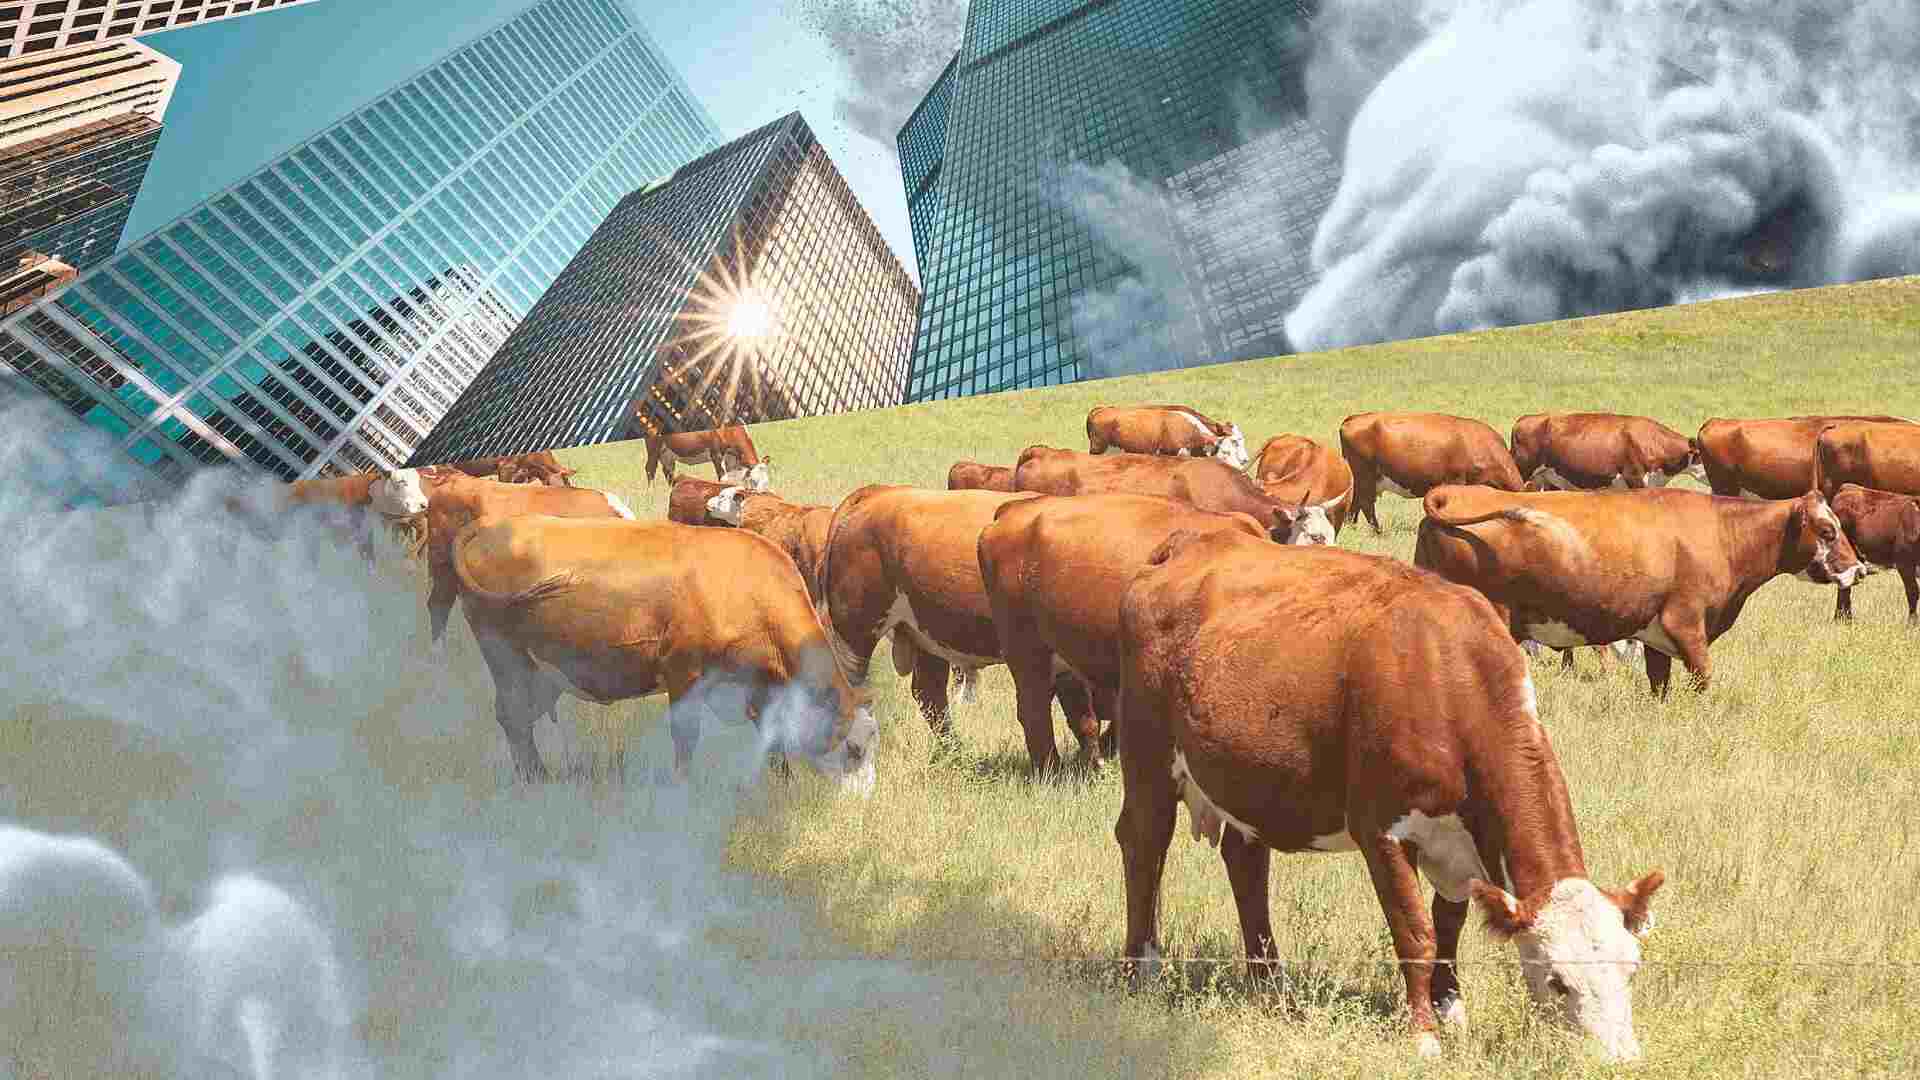 Big banks could help slash agricultural emissions—so why aren’t they?